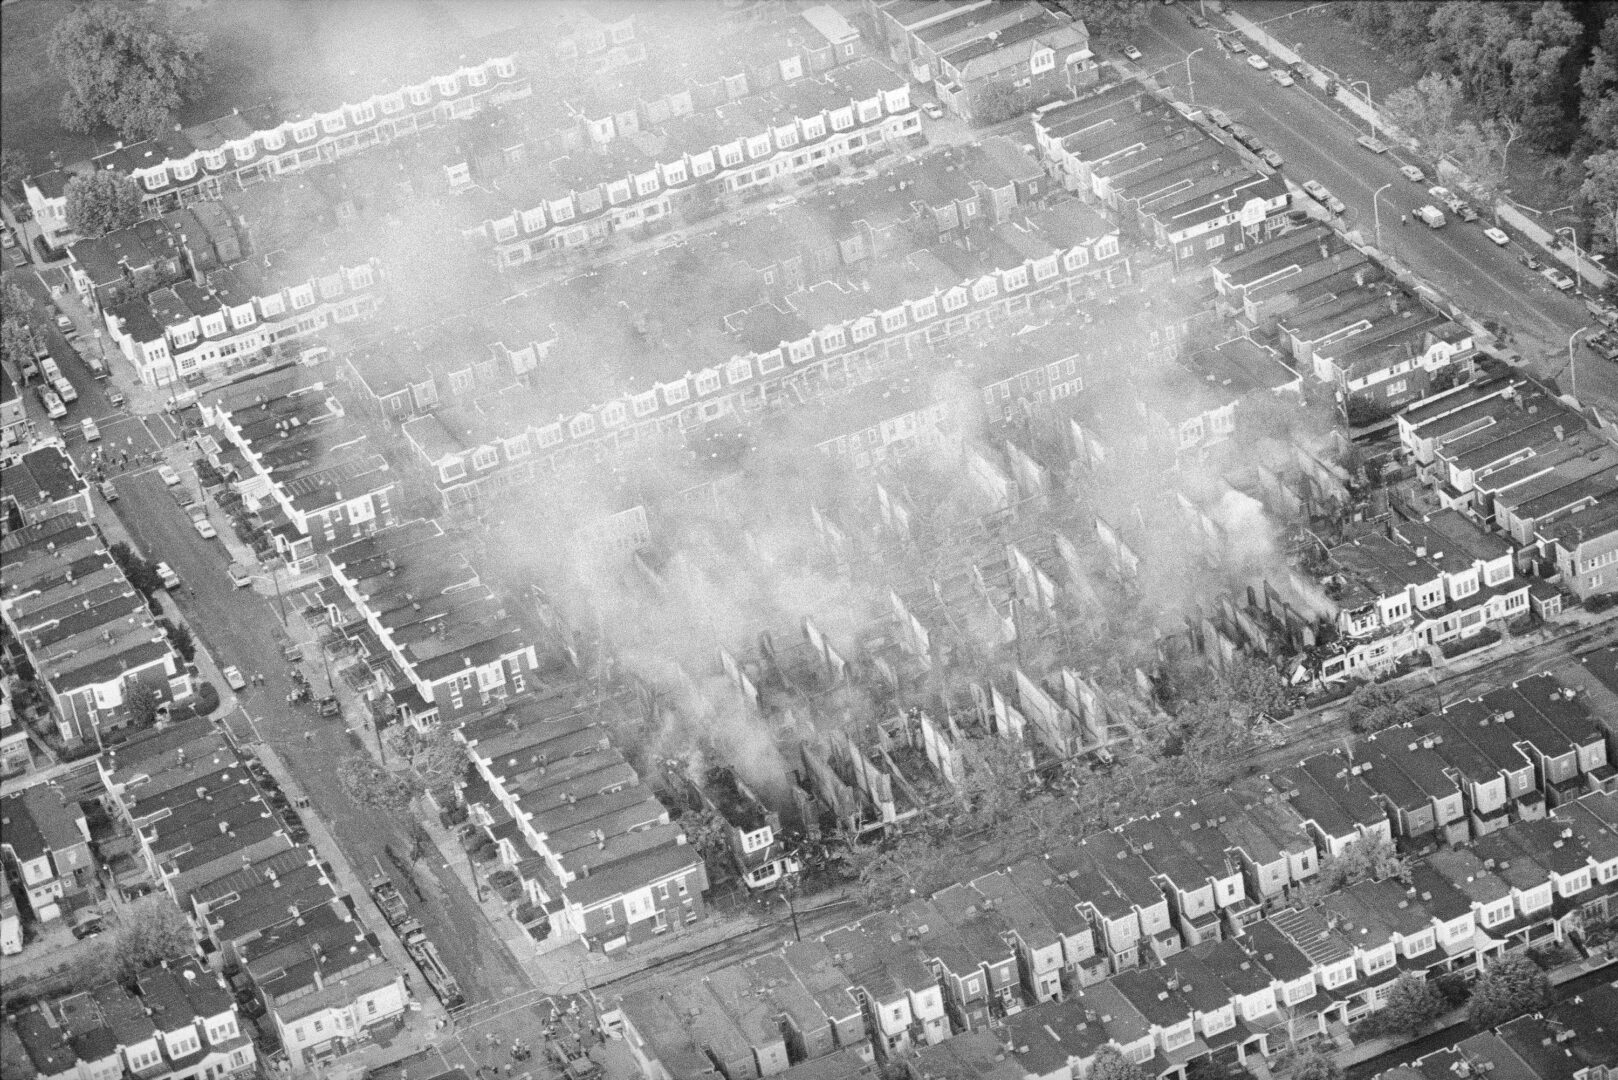 Smoke rises from the ashes of a West Philadelphia neighborhood, May 4, 1985, the morning after a siege between Philadelphia police and members of the radical group MOVE left 11 people dead and 61 homes destroyed. 